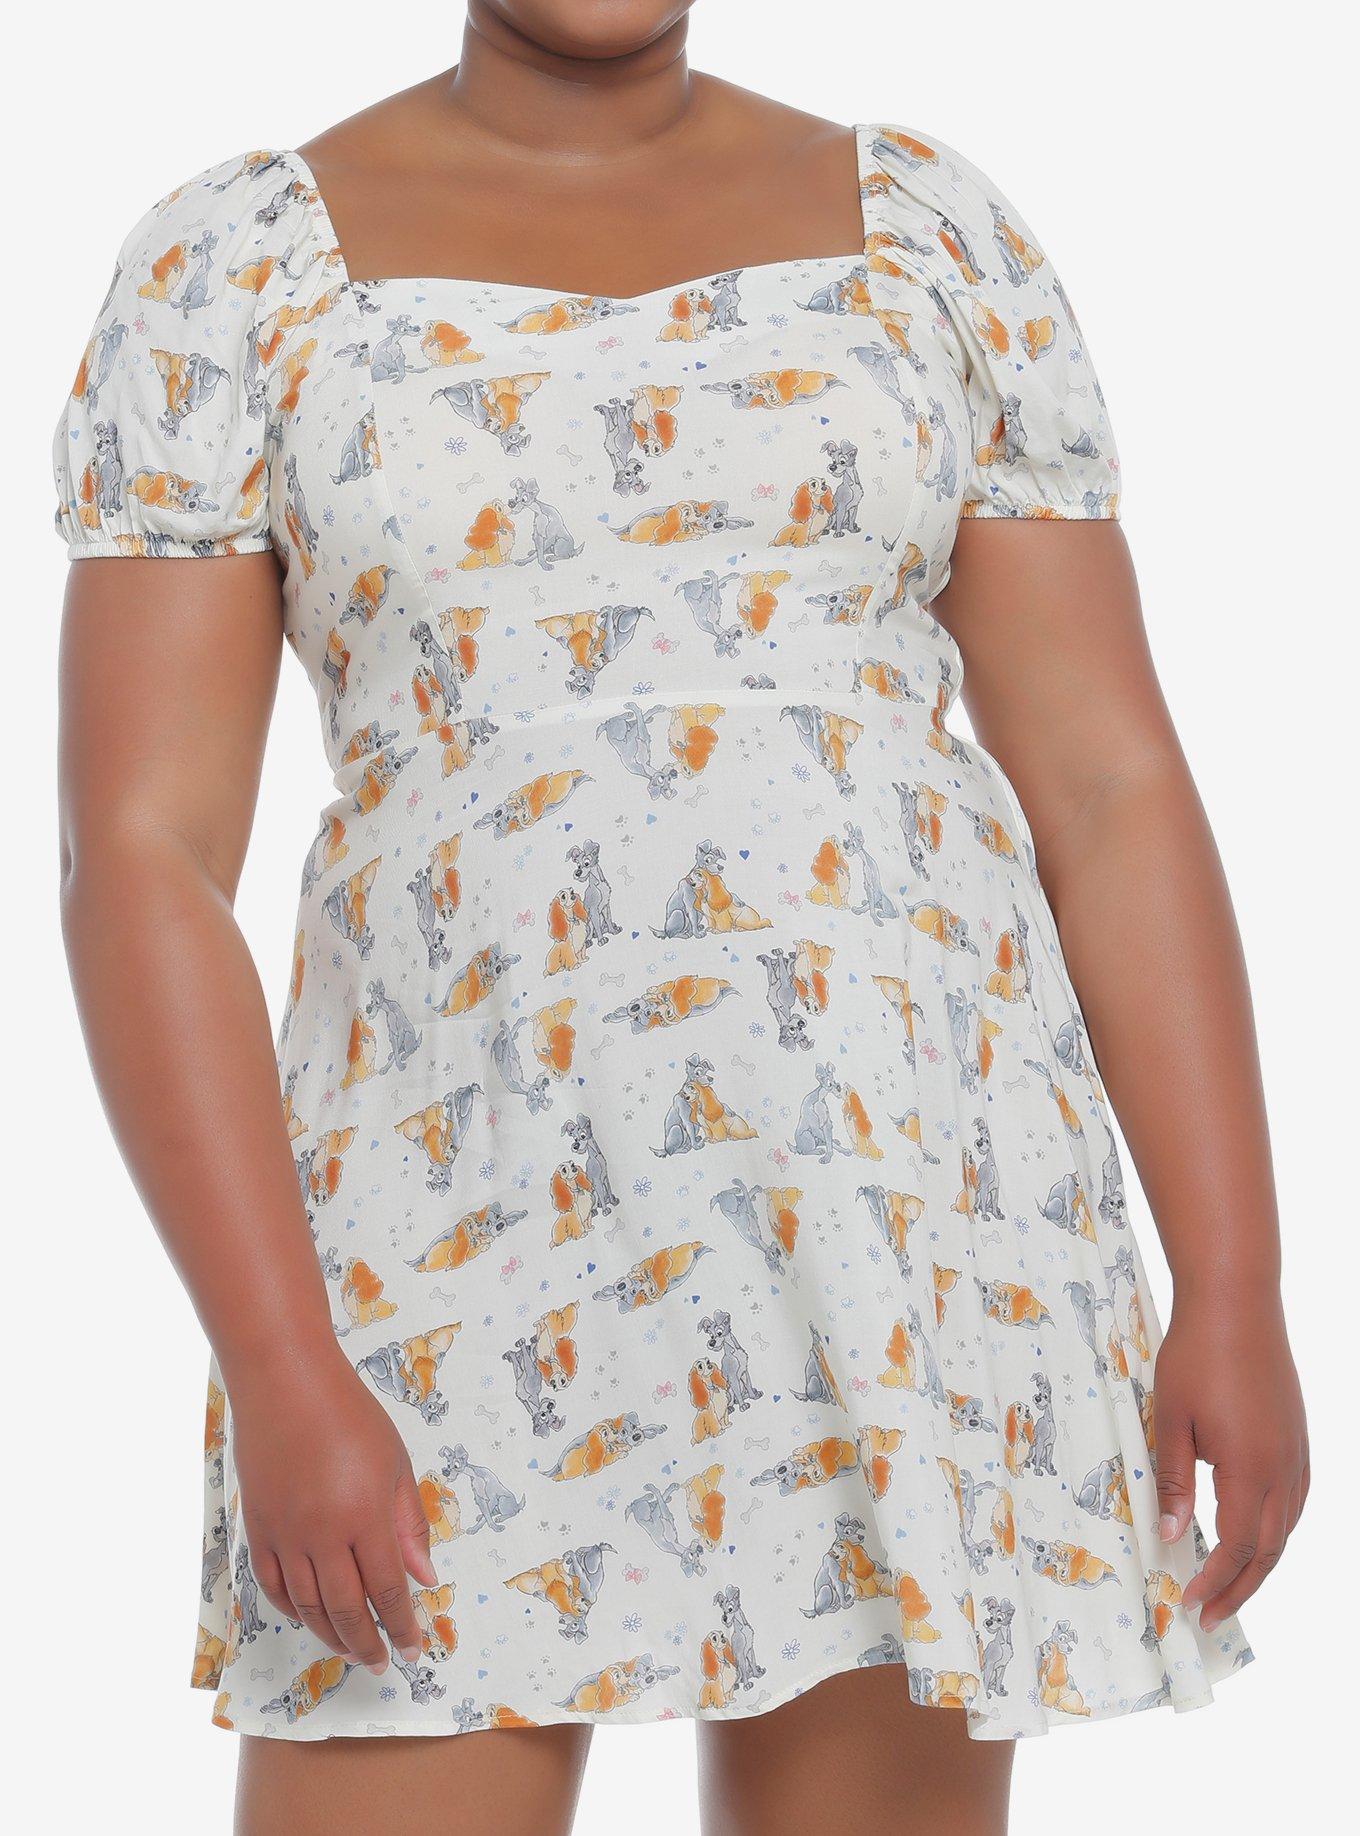 Disney Lady And The Tramp Sweetheart Dress Plus Size, MULTI, hi-res